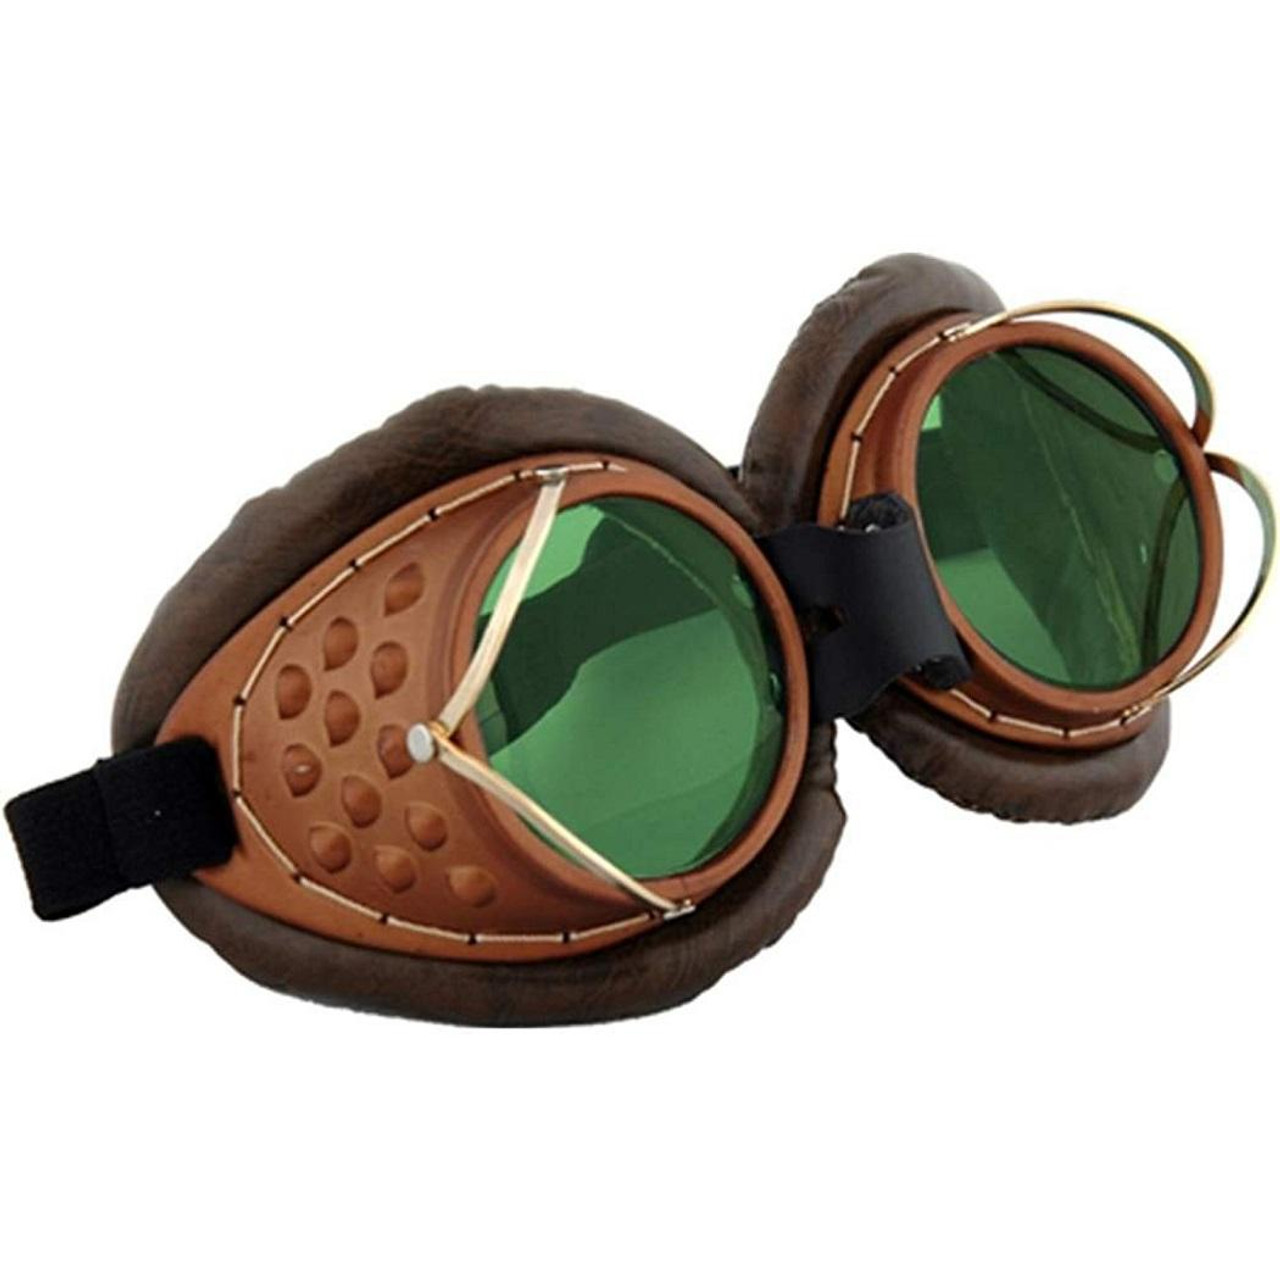 Steampunk Style Goggles